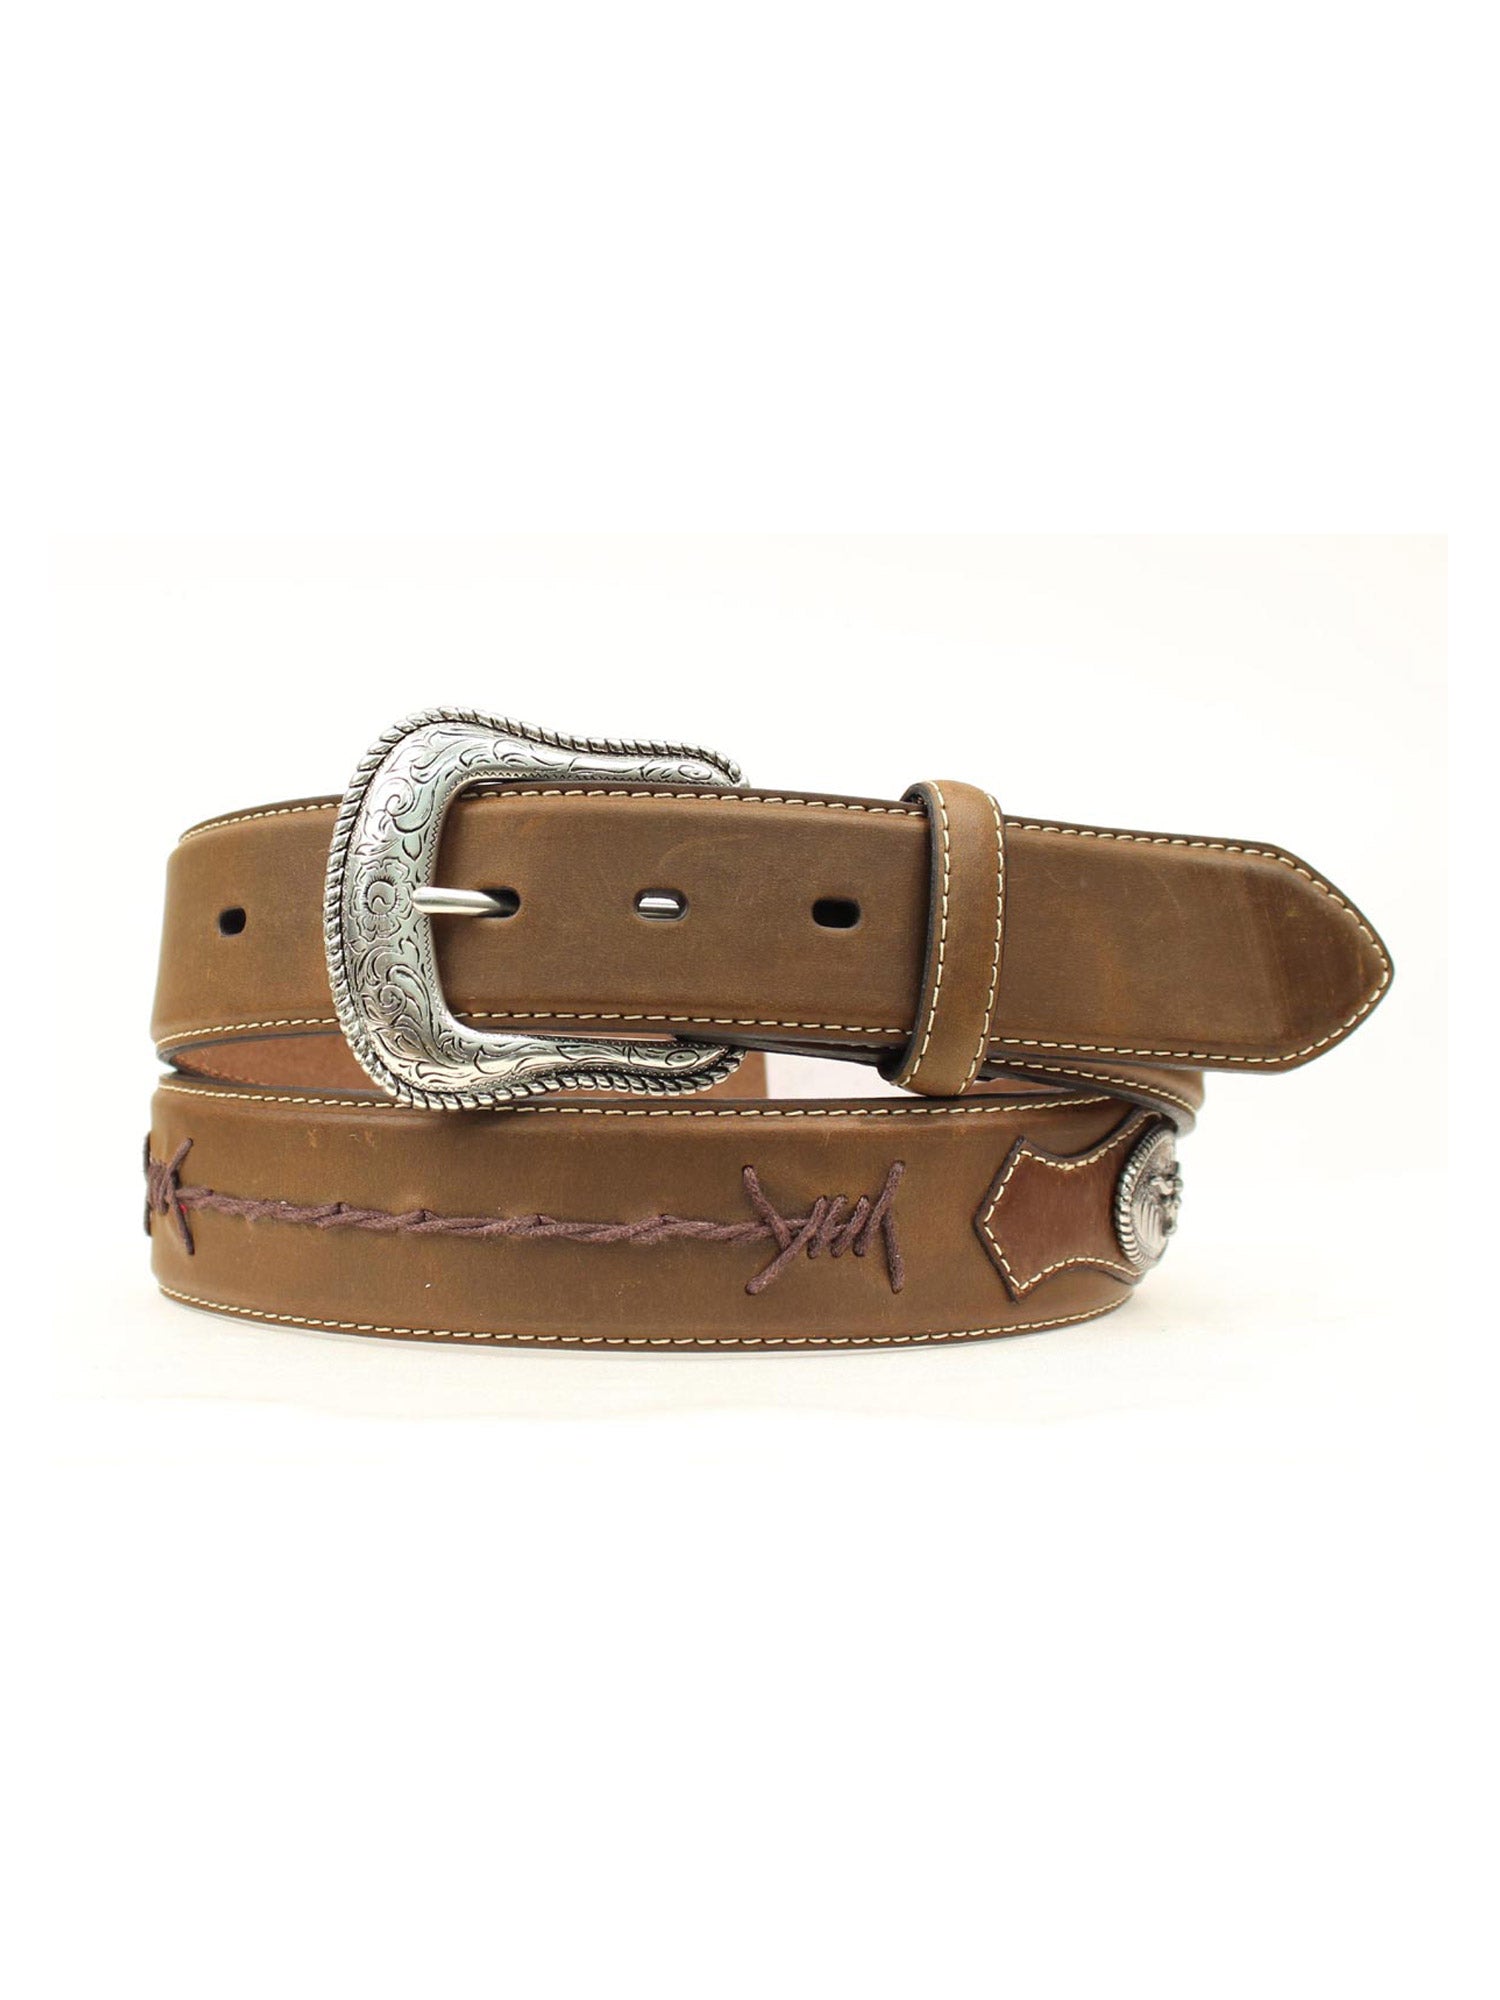 Nocona N2474644 Top Hand Western Belt with Barb Wire Steer Conchos